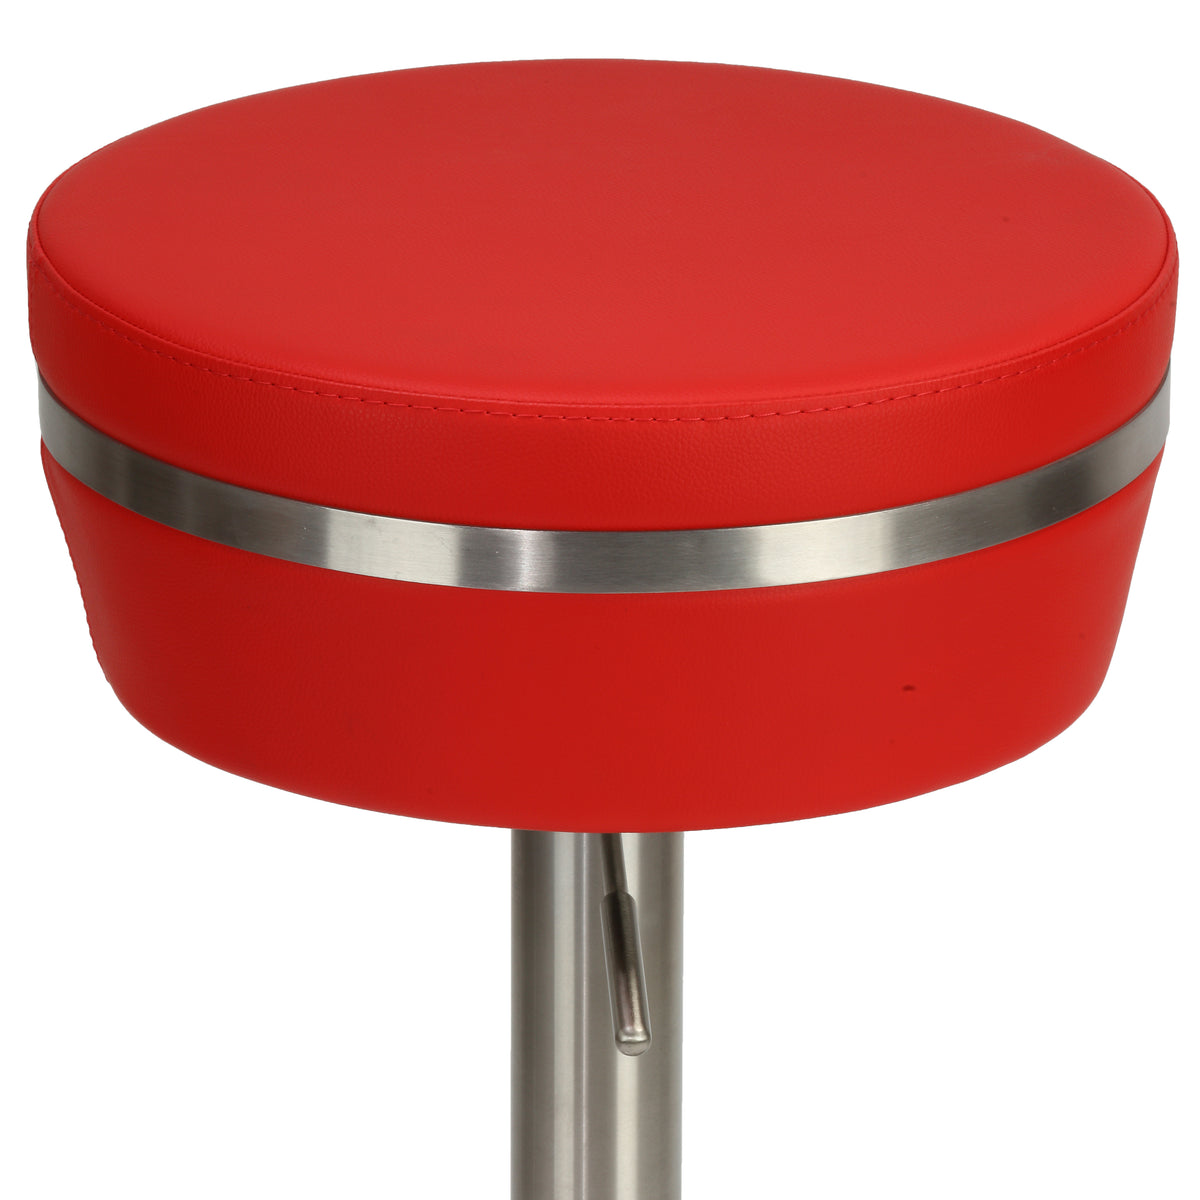 Cortesi Home Athena Premium Adjustable Backless Round Barstool in Brushed Stainless Steel with Heavy Solid Base, Red